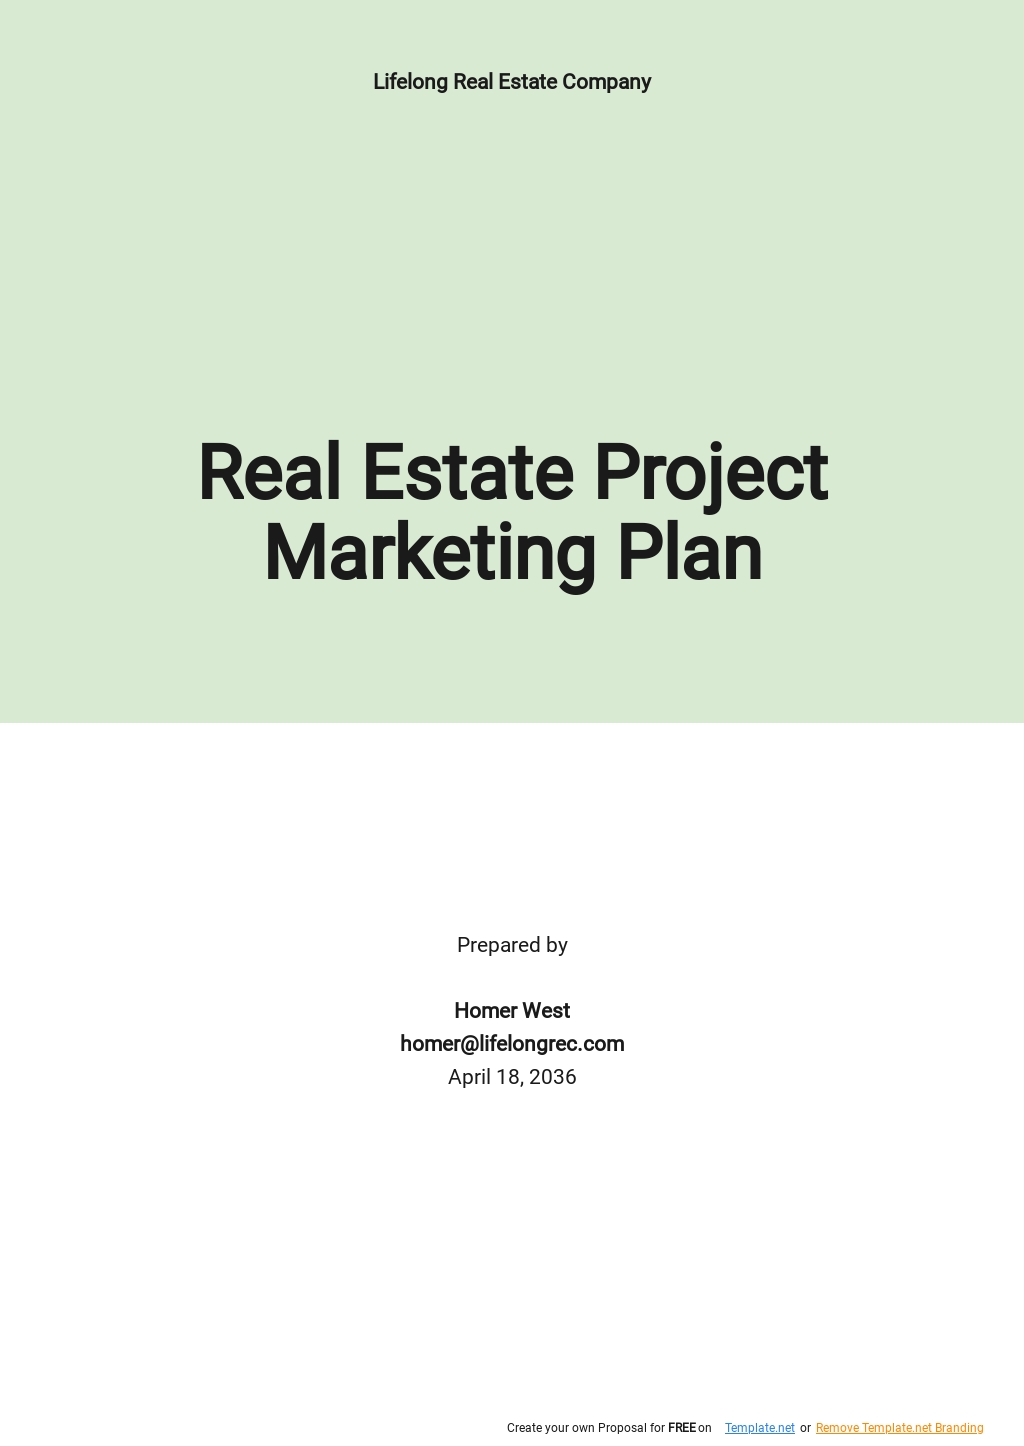 Real Estate Project Marketing Plan Template.jpe